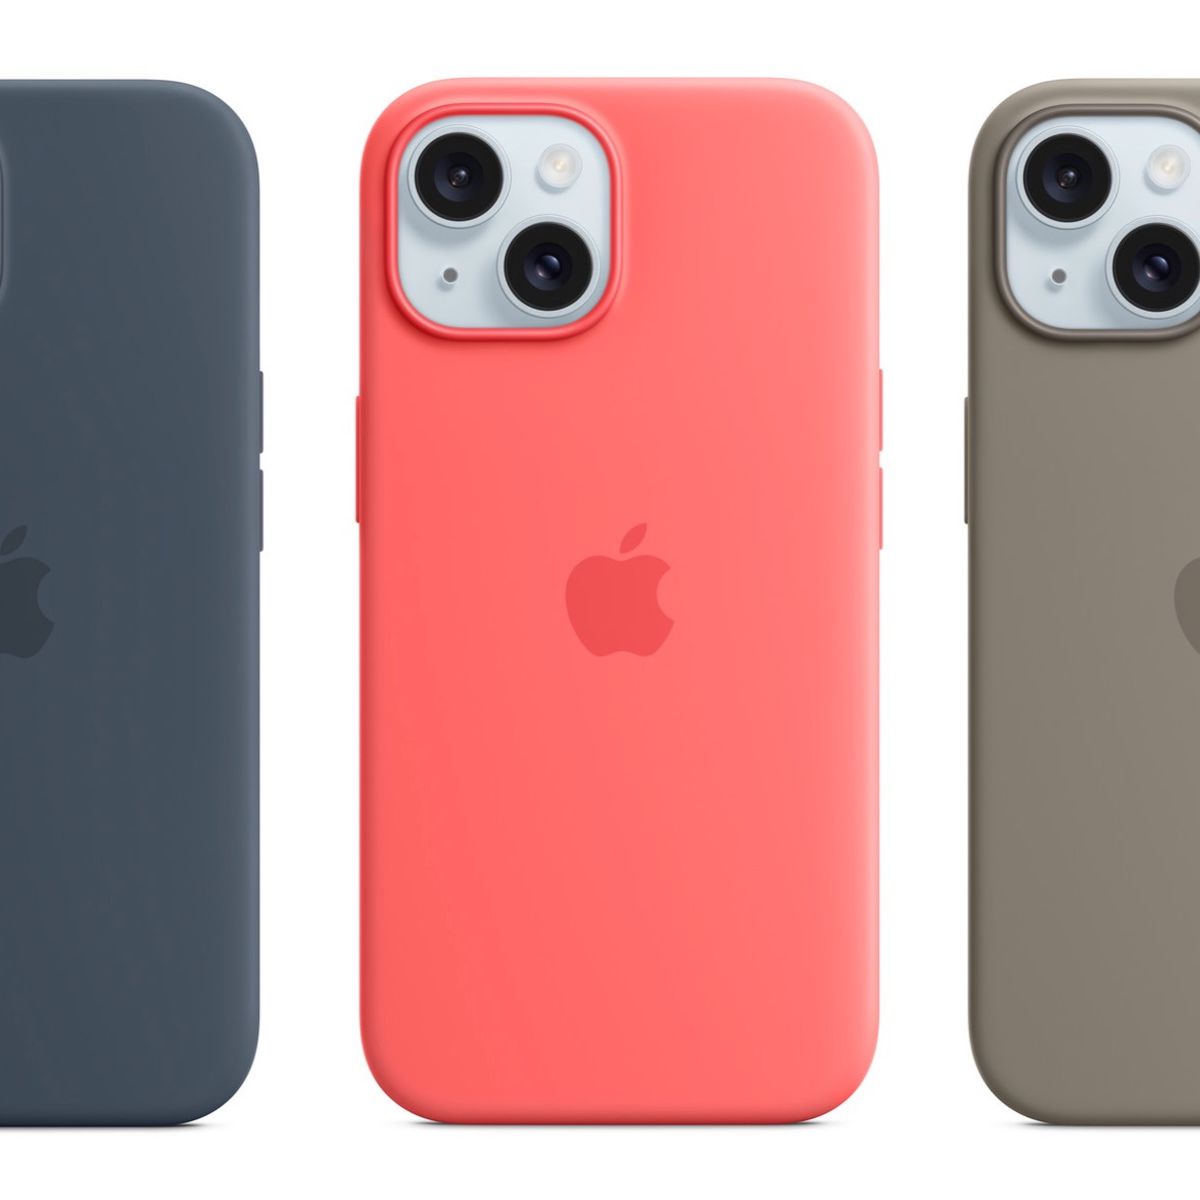 Apple Releases iPhone 11 and 11 Pro Silicone Cases in New Colors - MacRumors